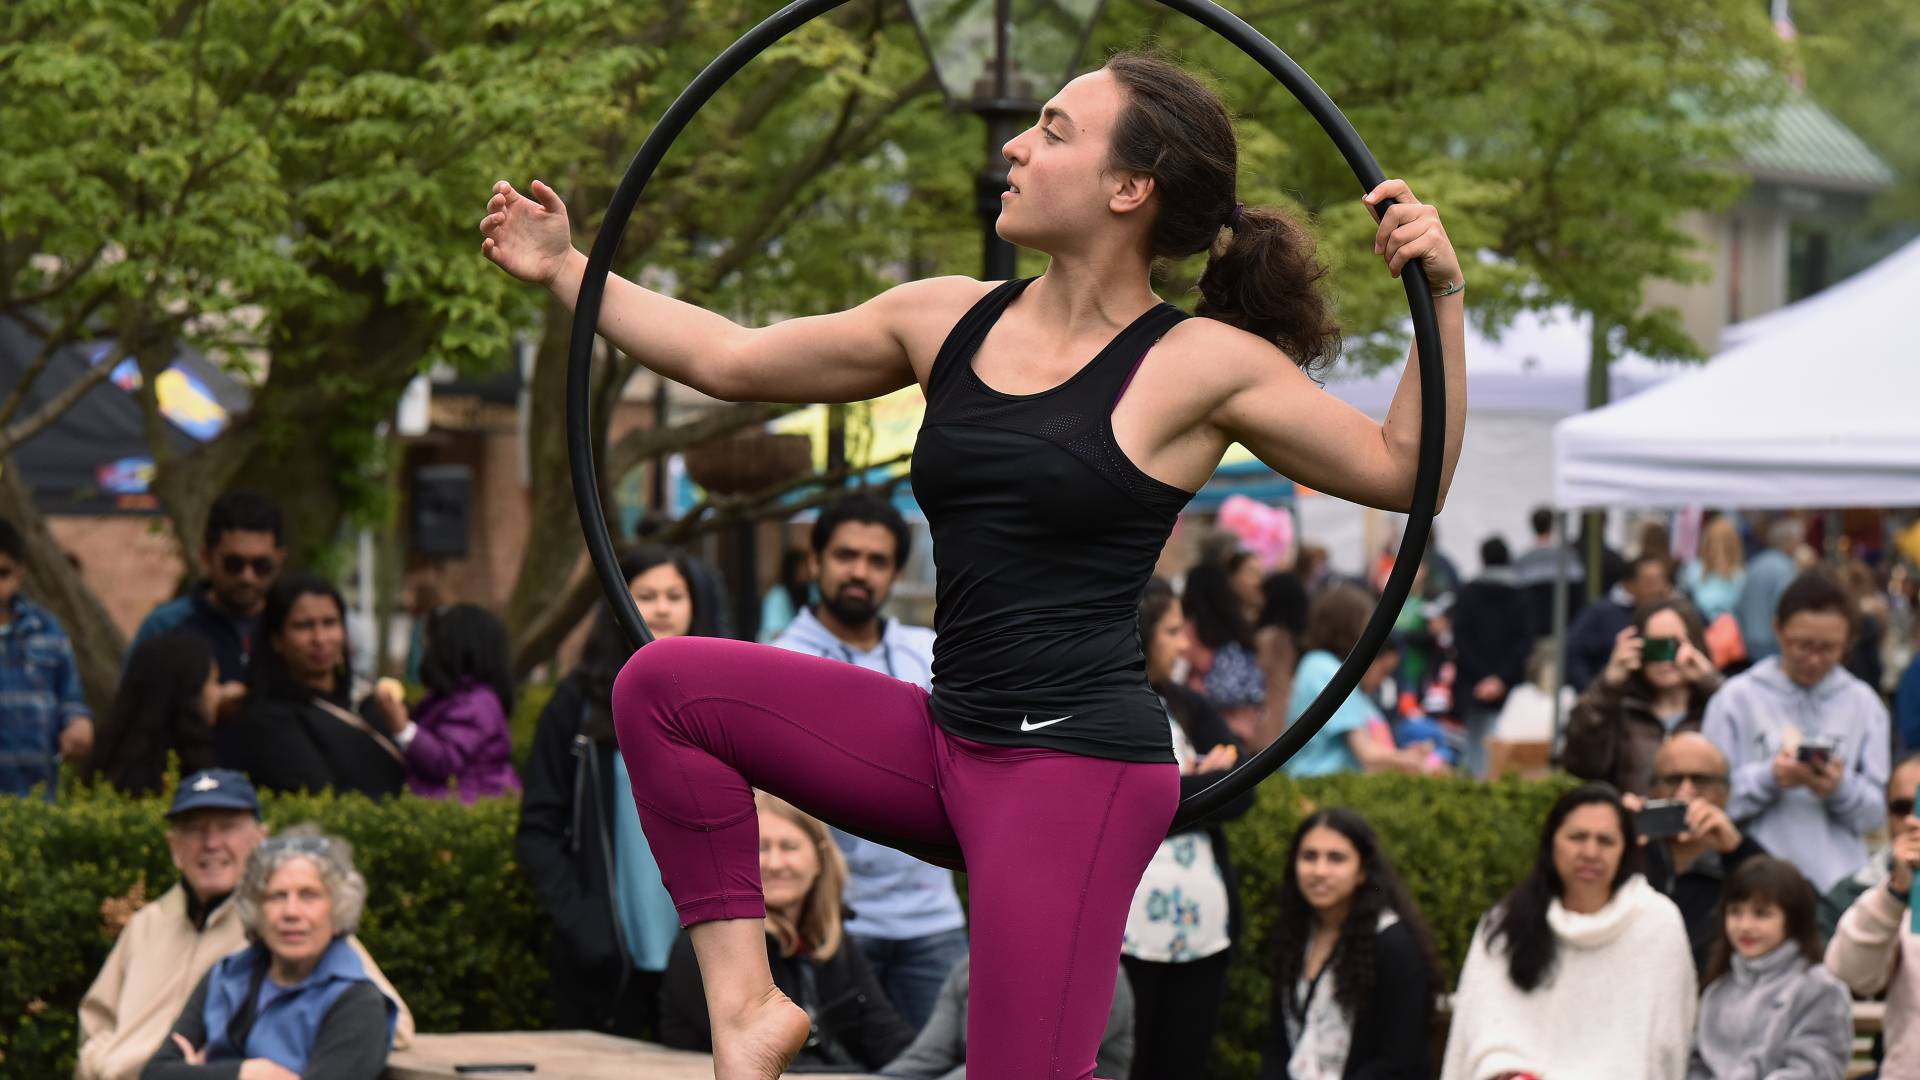 A woman performs aerial moves in a hoop